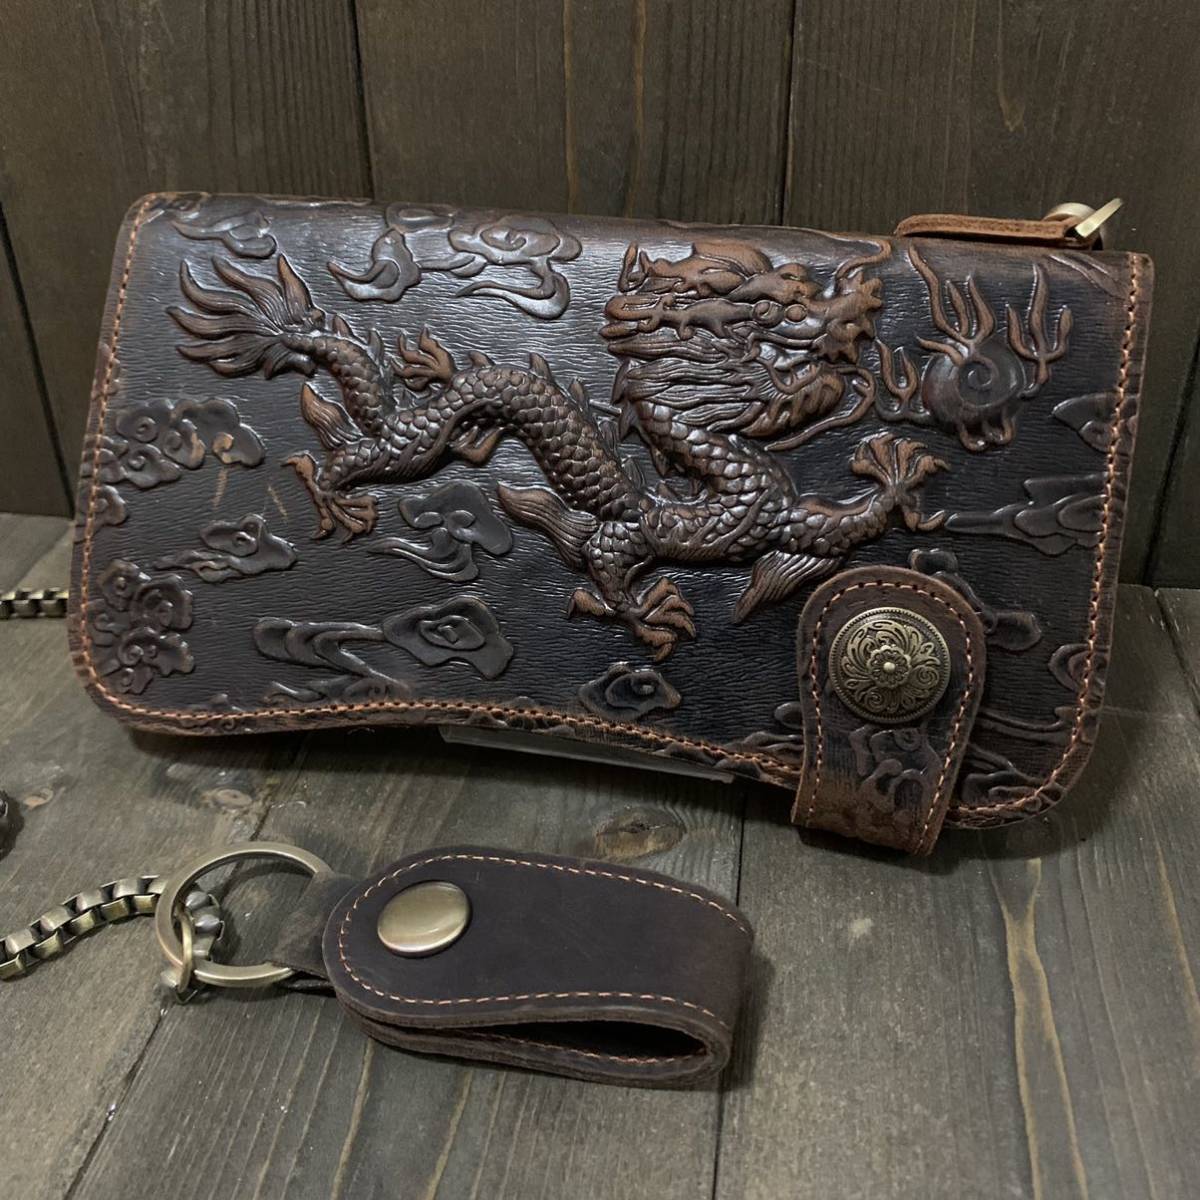  high class cow original leather # Carving Biker z wallet purse #k Lazy hose leather # dragon F Conti . leather long wallet wallet chain attaching 